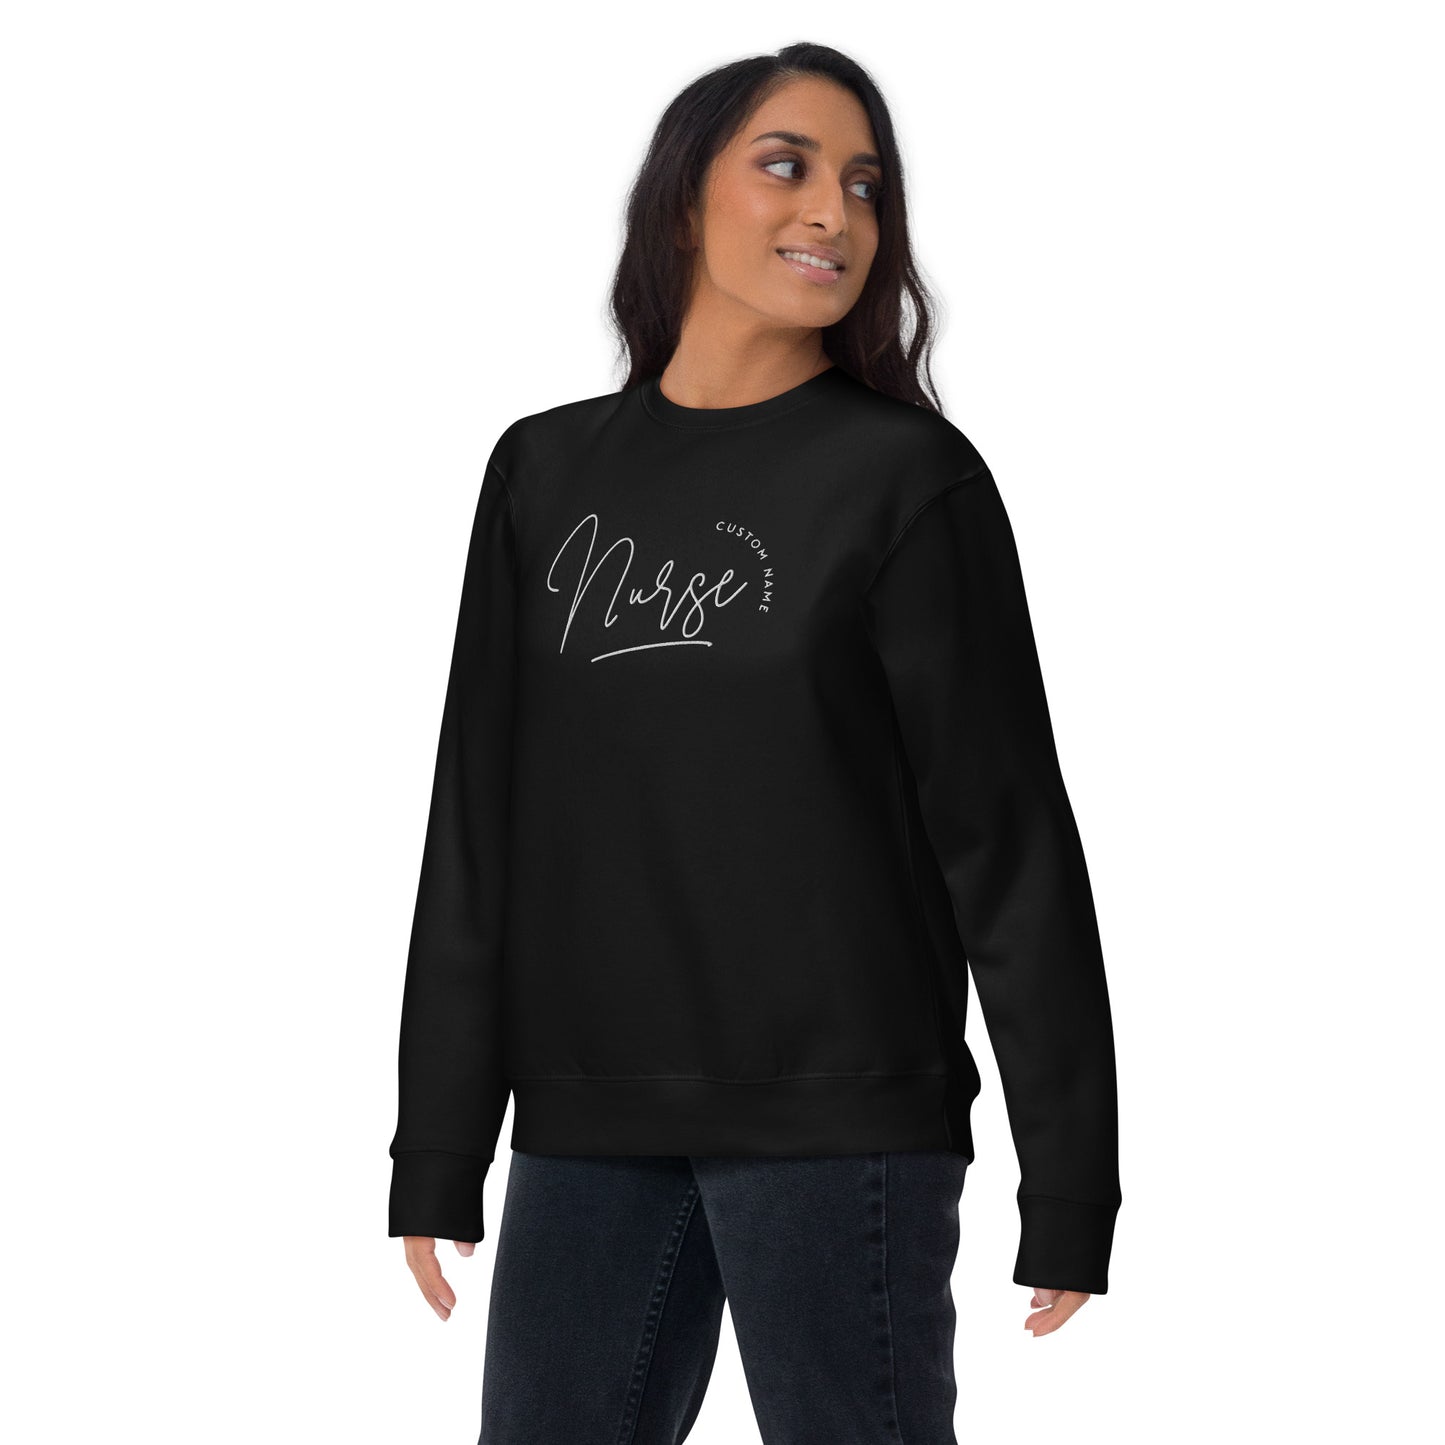 Custom Text Embroidered Nurse Name or Unit Premium Sweatshirt (MUST EMAIL contact@nursedripfit.com or contact via social media/chat to initiate custom order)